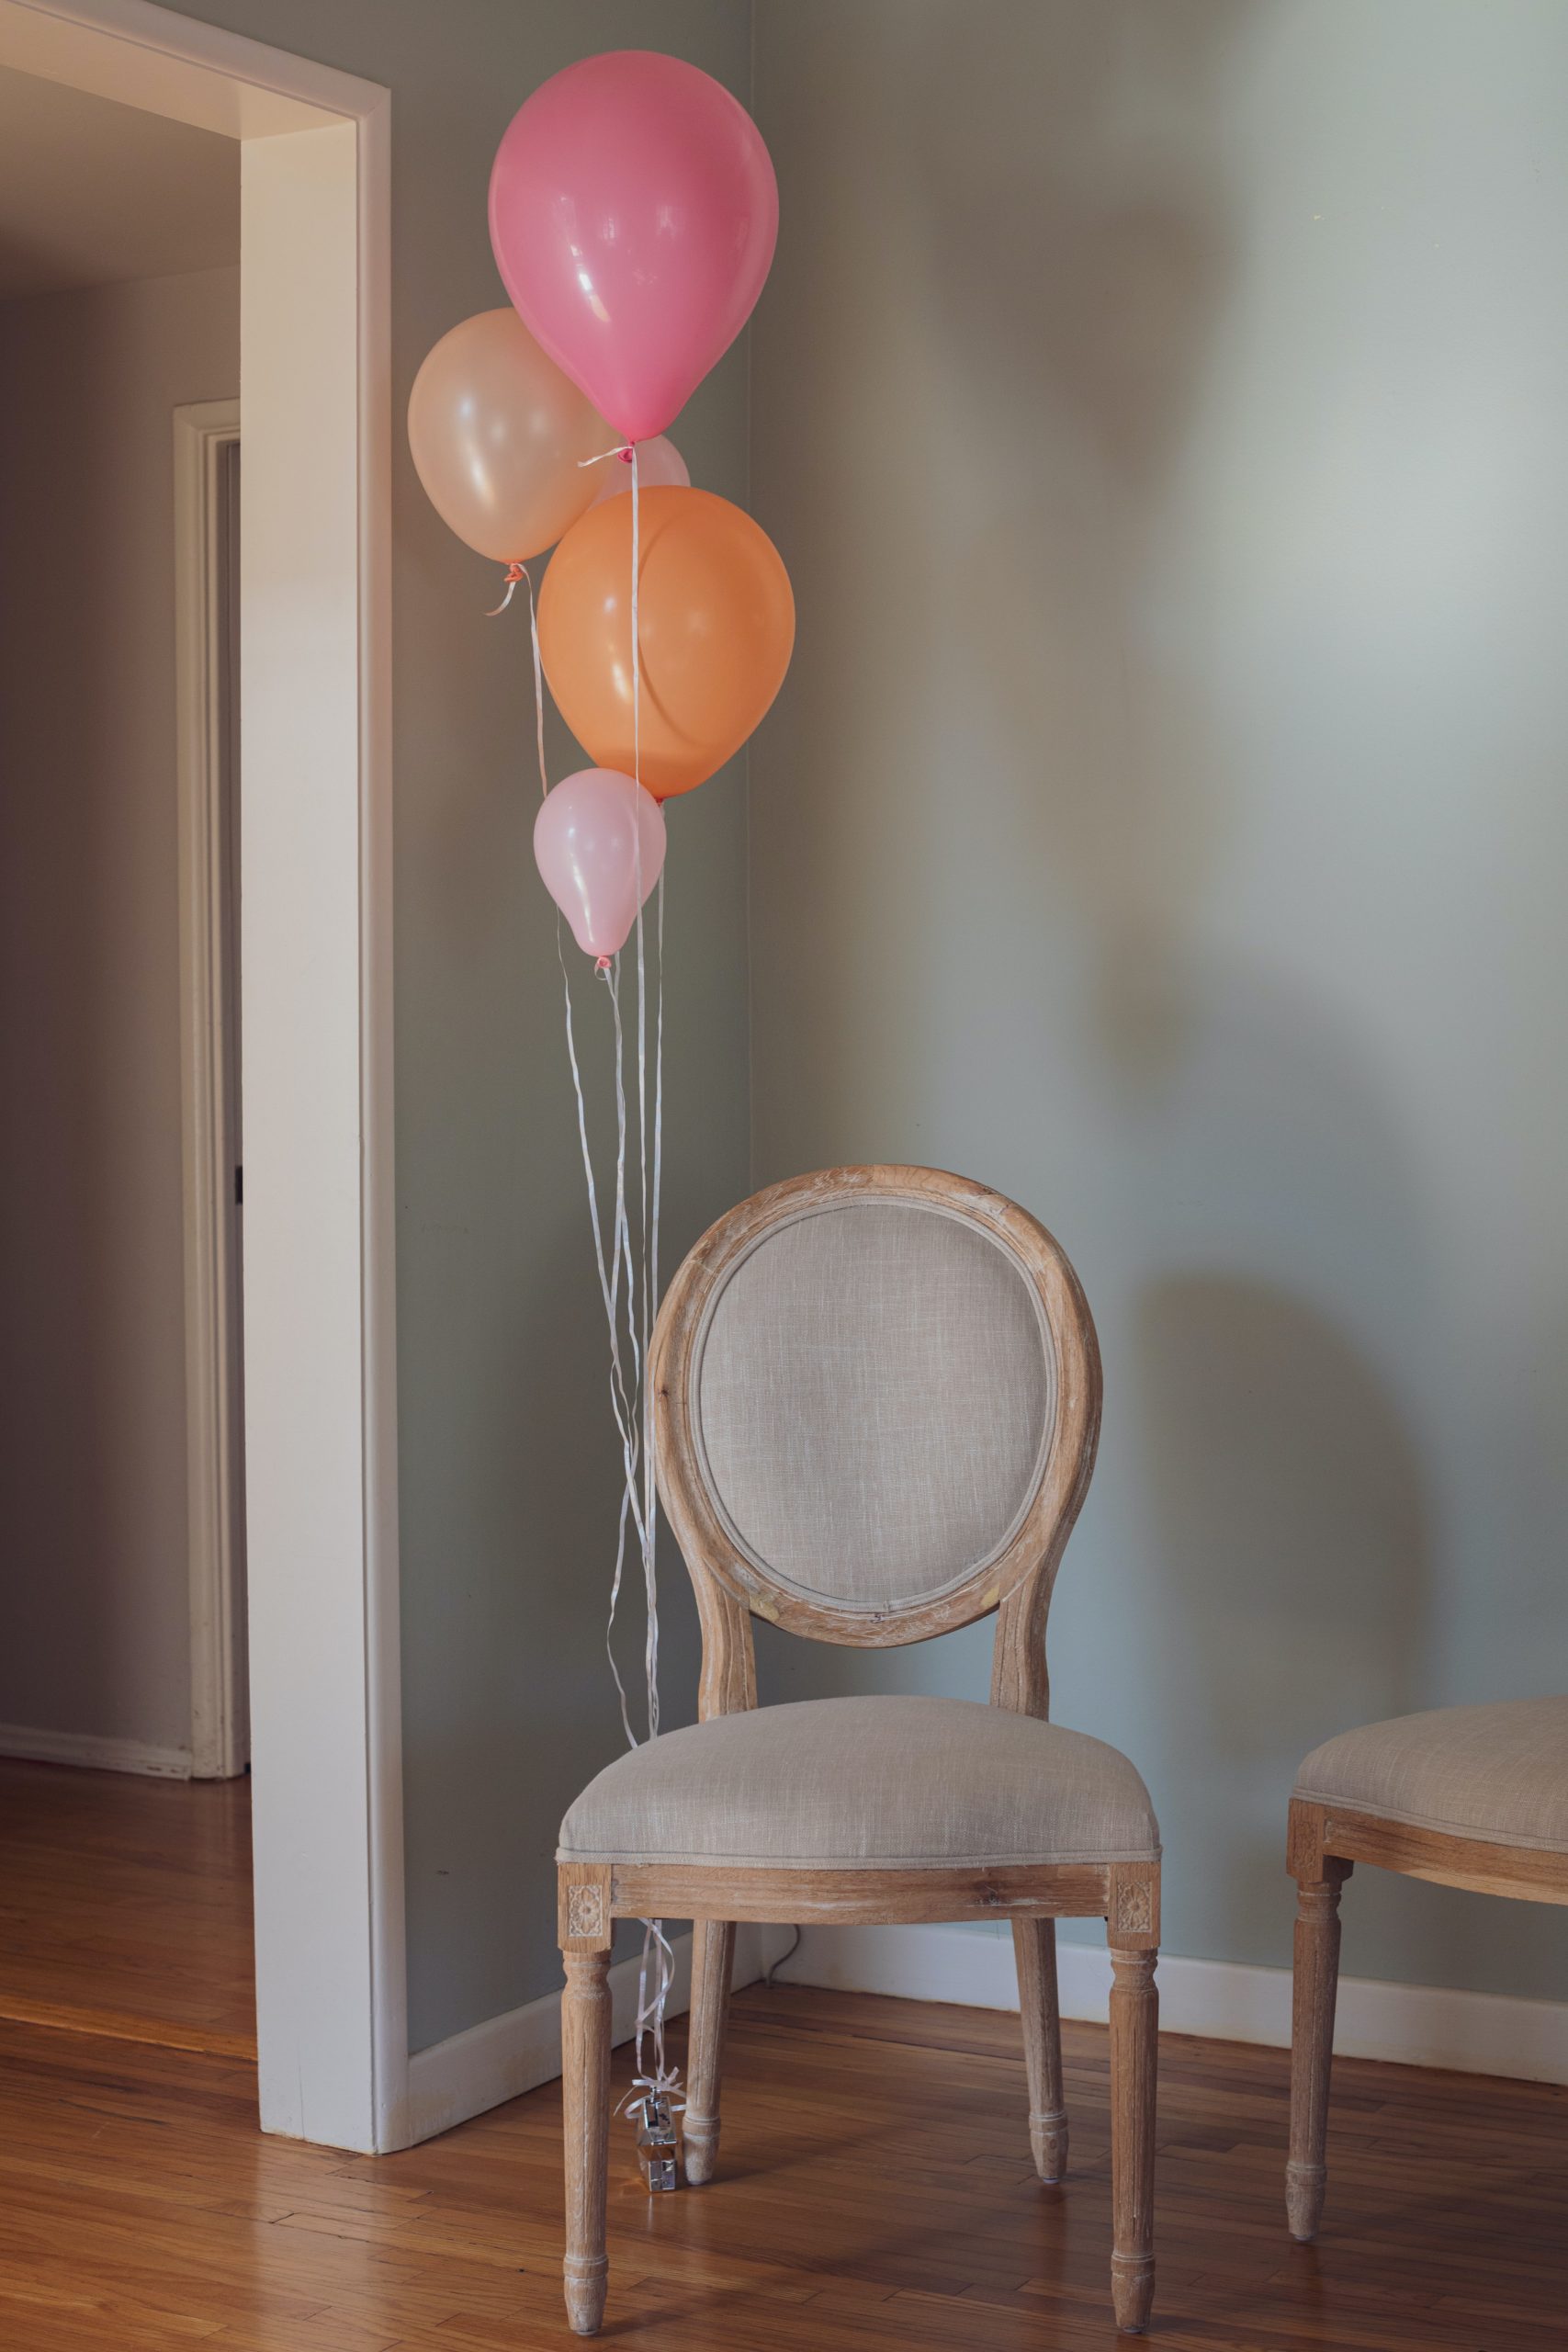 How To Decorate A Baby Shower Chair